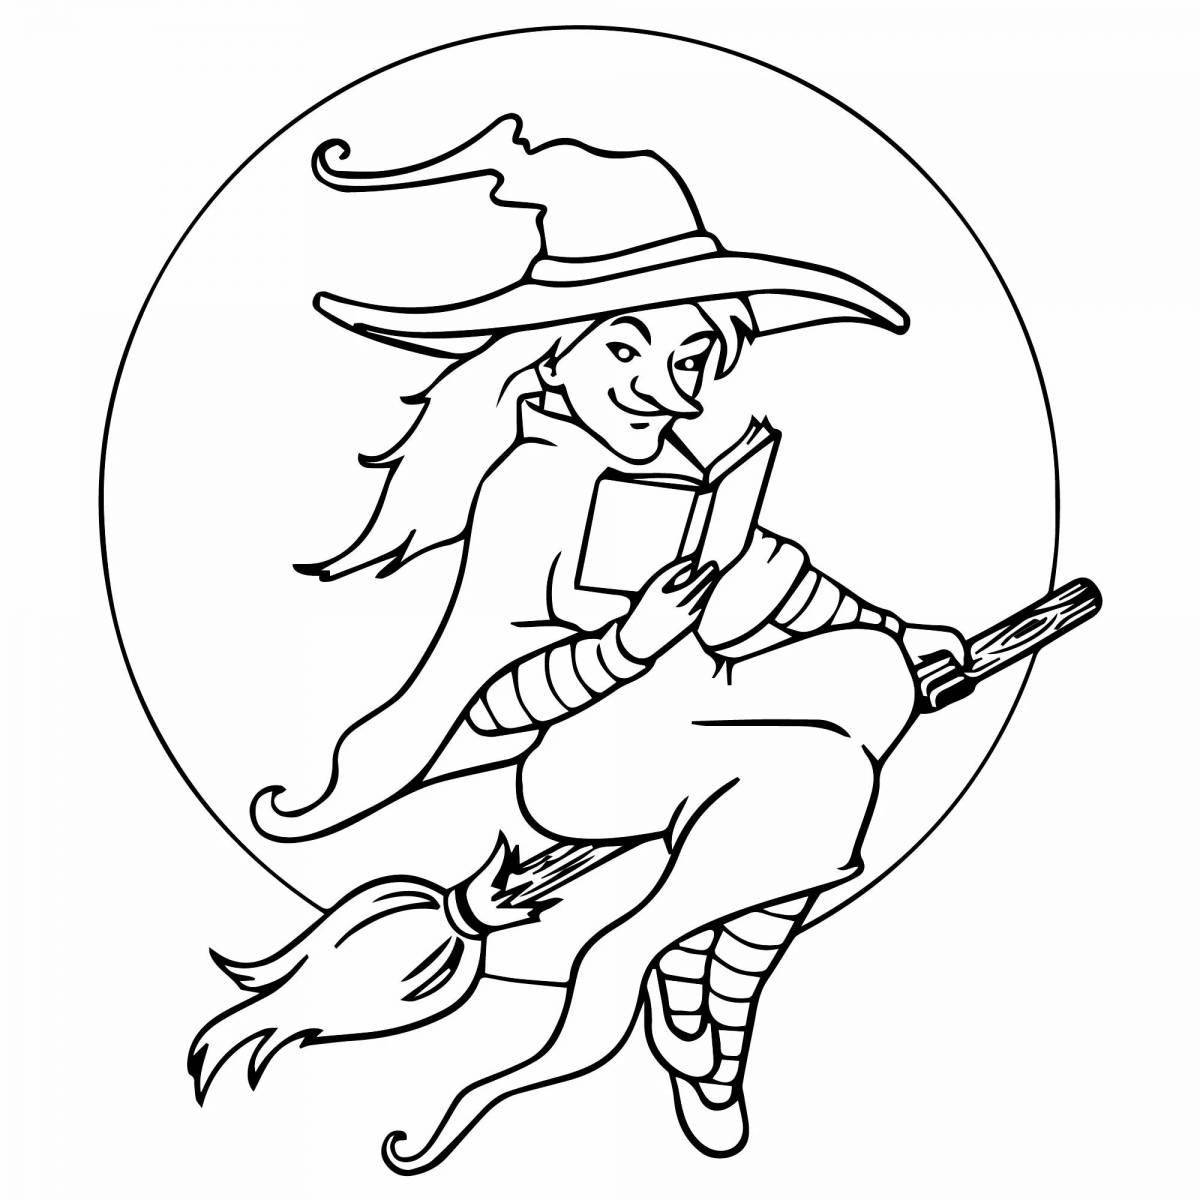 Coloring page of spells for real witches